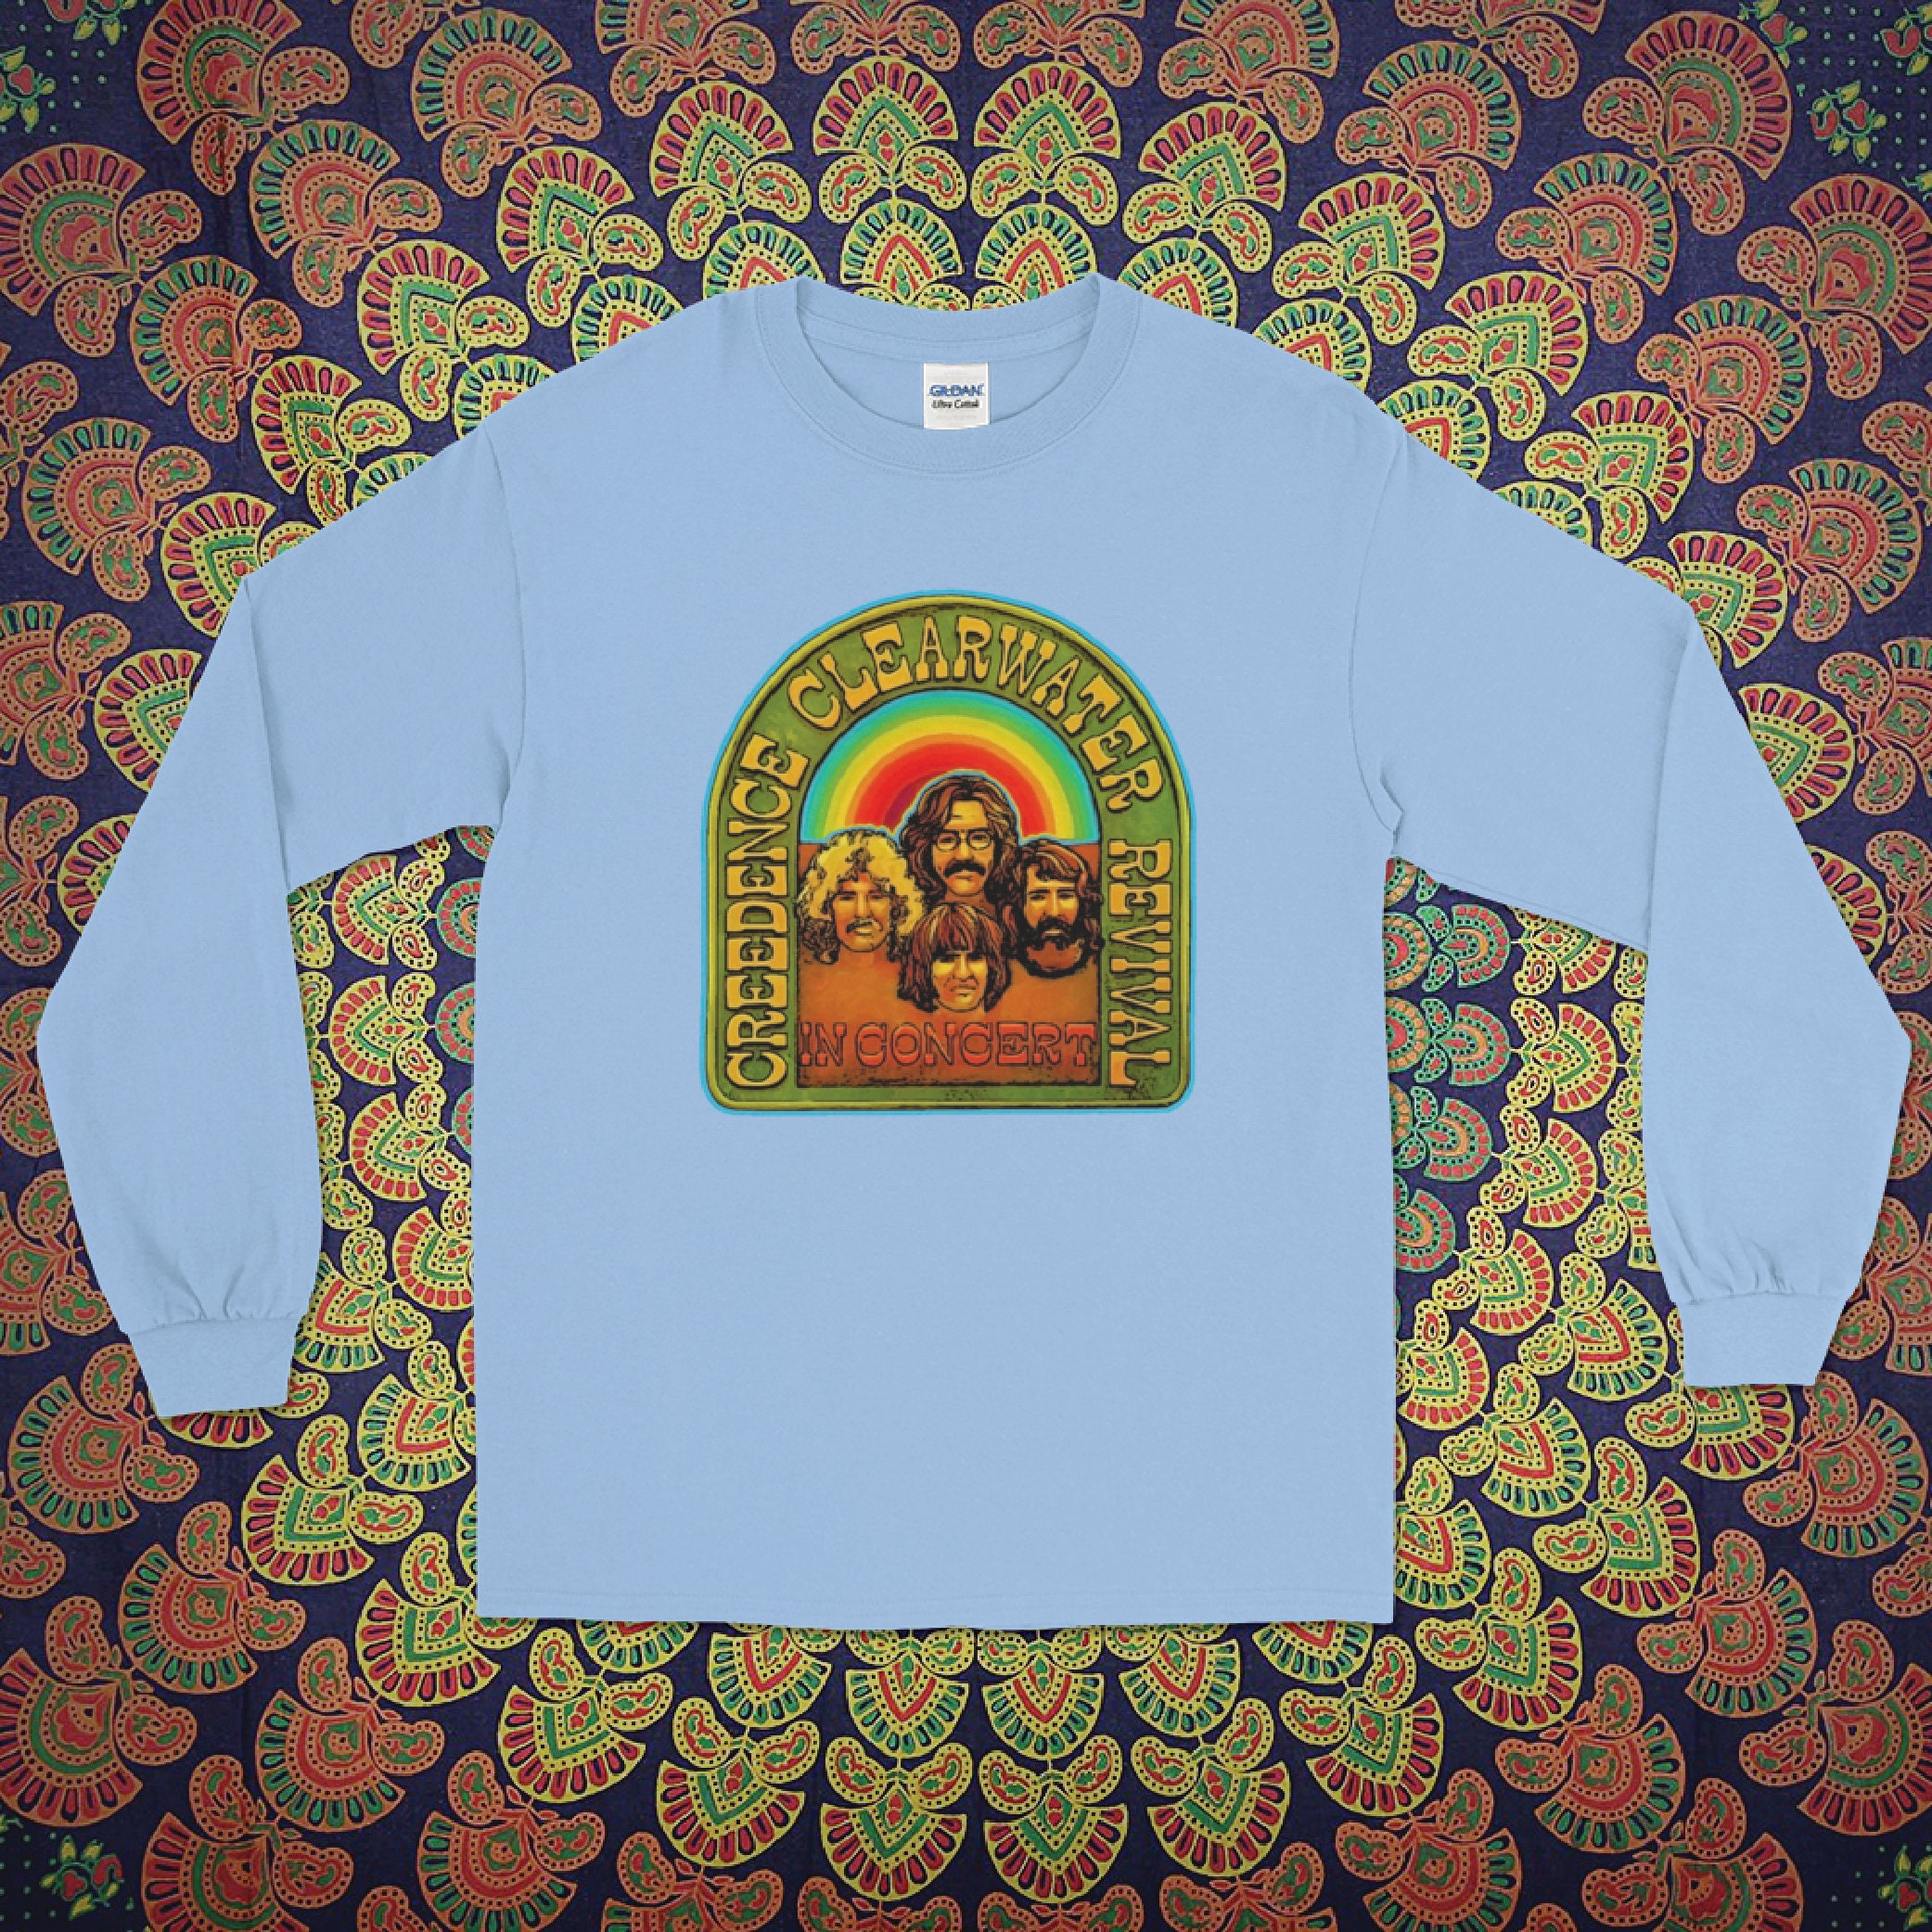 Native Style Creedence Clearwater Revival Unisex Sweatshirt